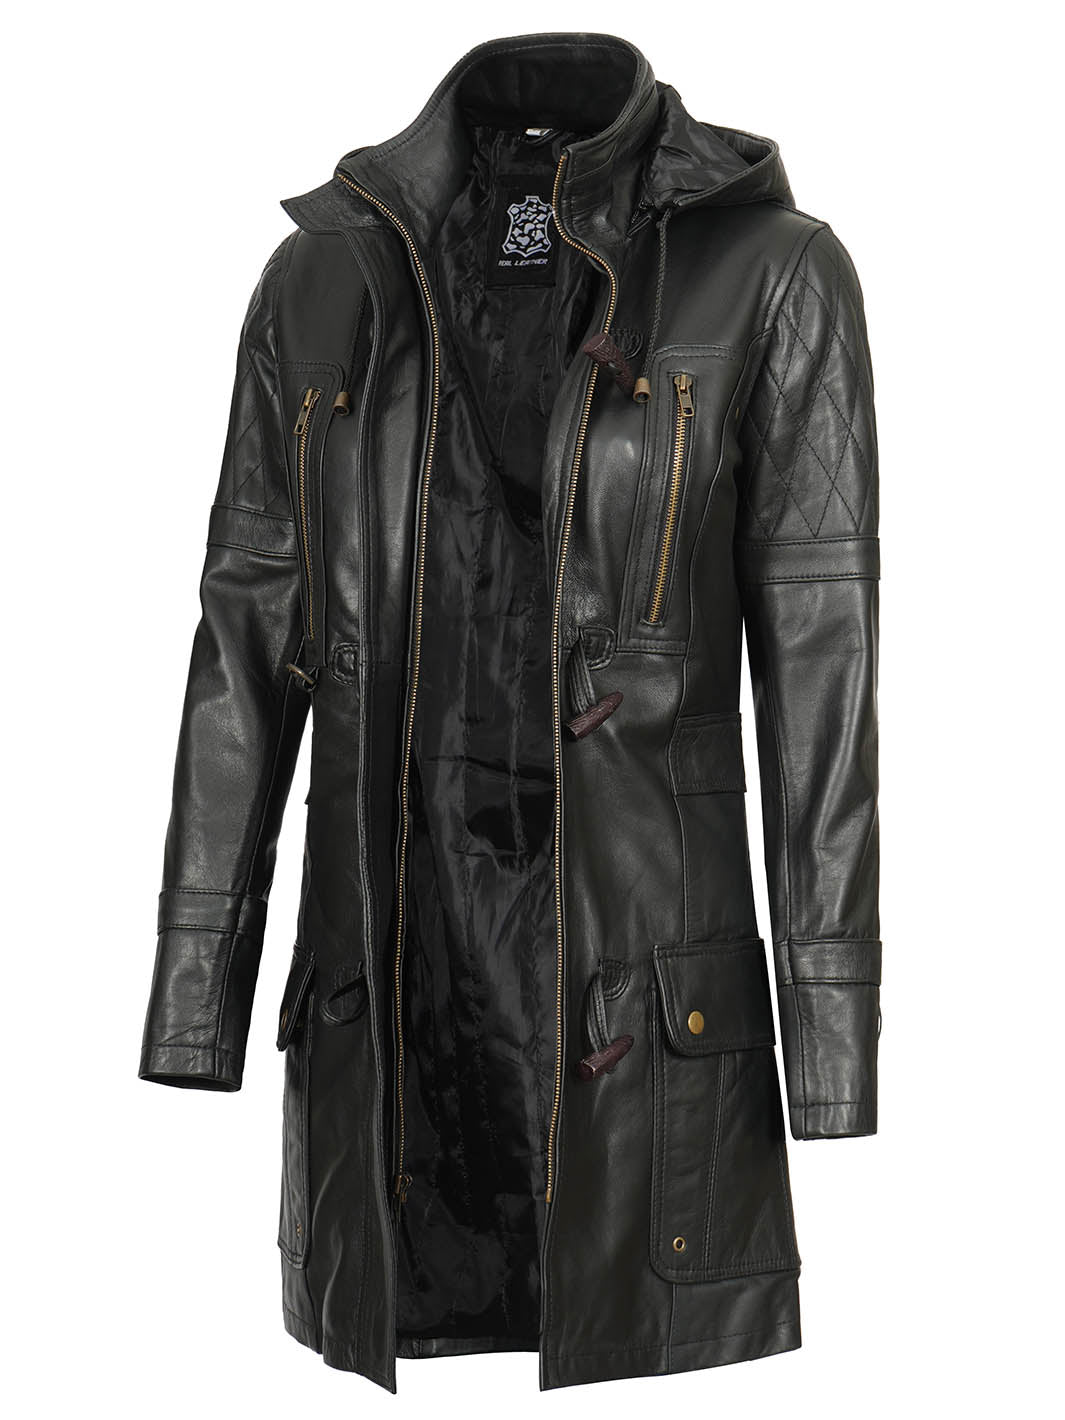 Womens Real Leather Black hooded Coat